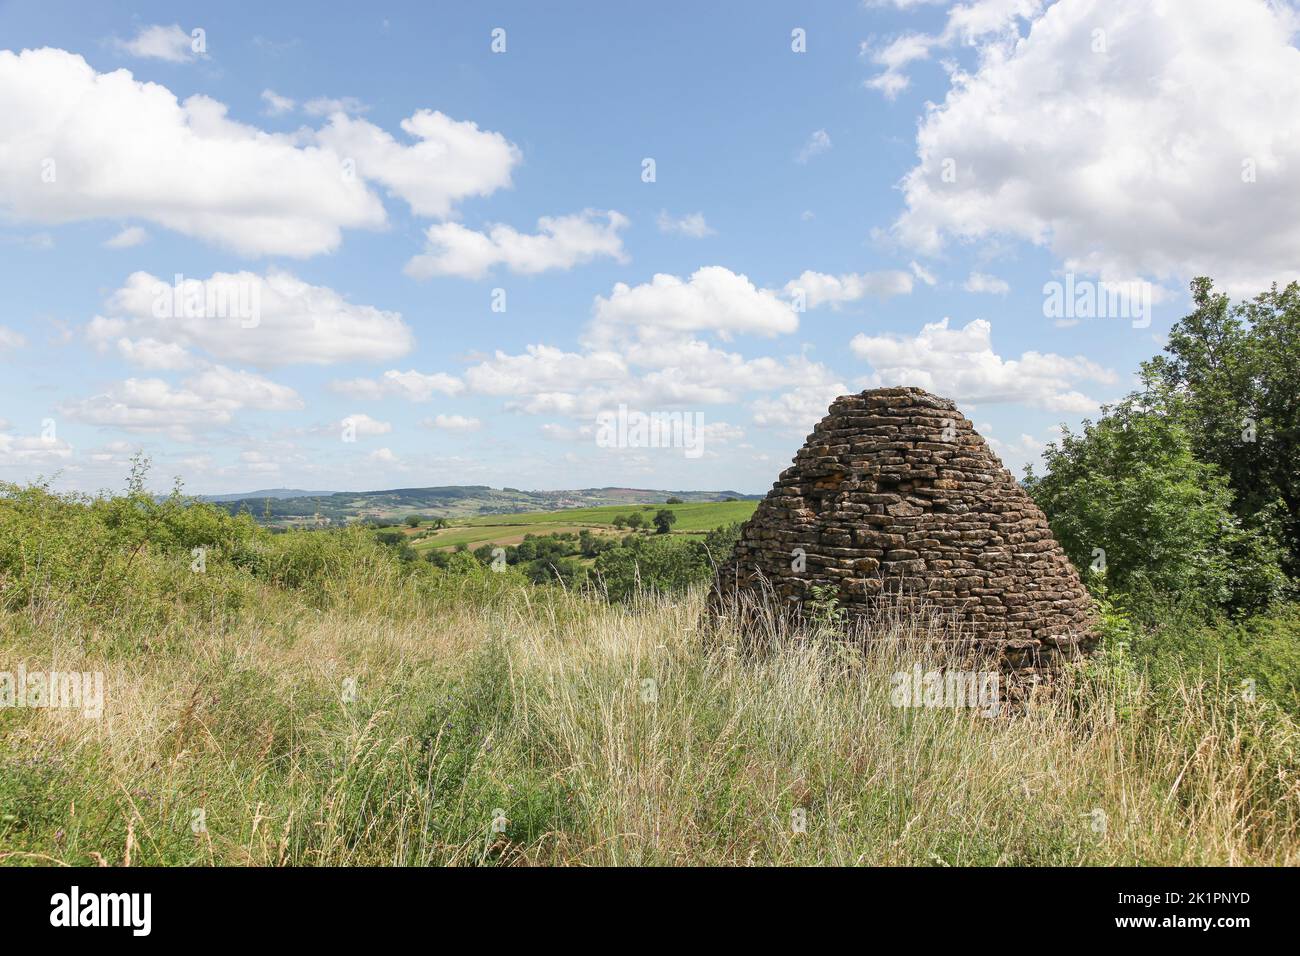 Landscape in Theize, Beaujolais with a stone hut called cadole in french language Stock Photo